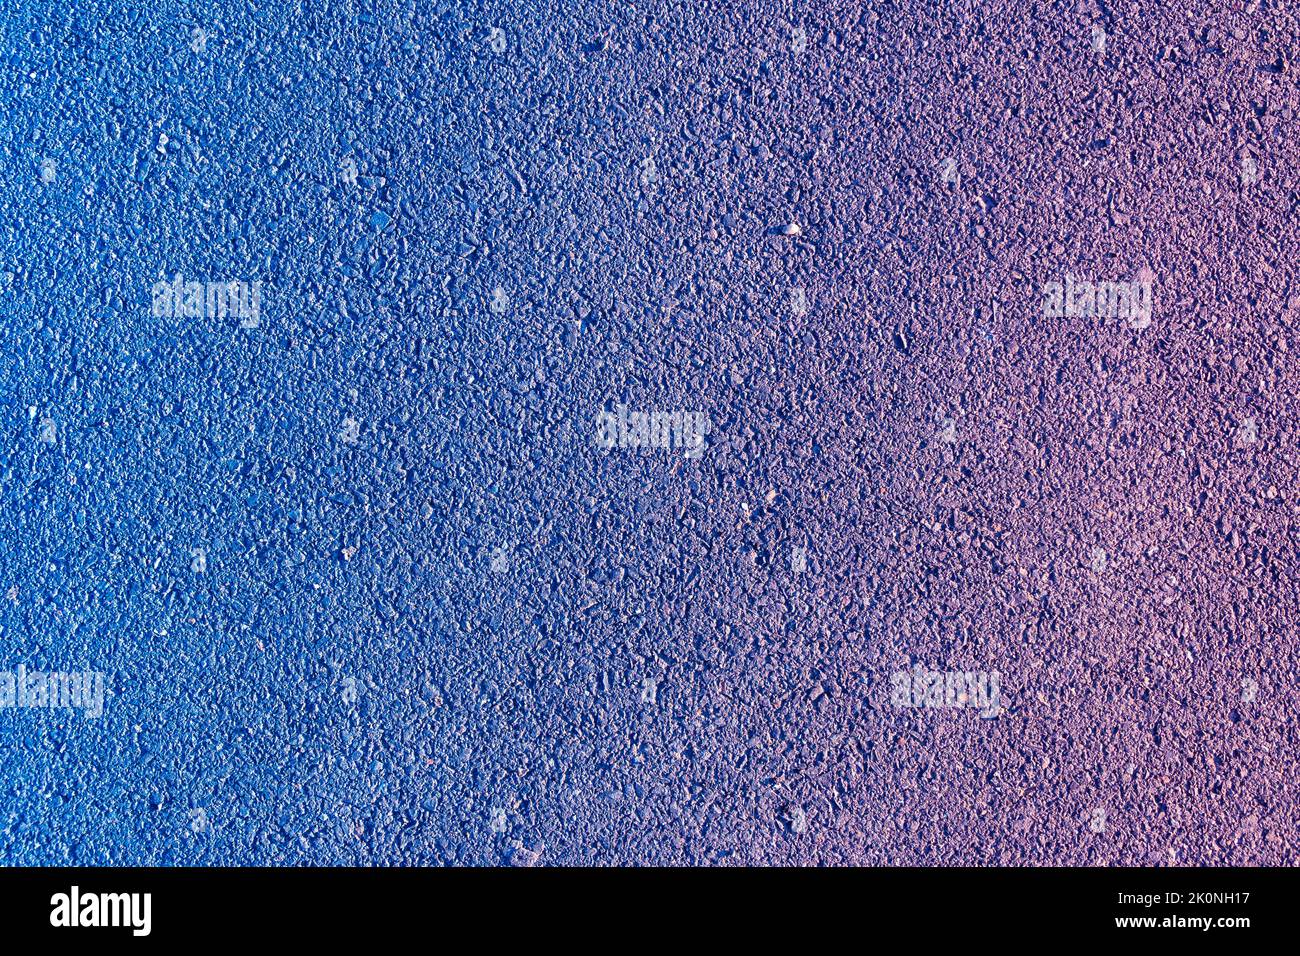 texture of a new asphalt pavement with small stone and sand with a purple-blue color gradient overlaid, selective focus Stock Photo